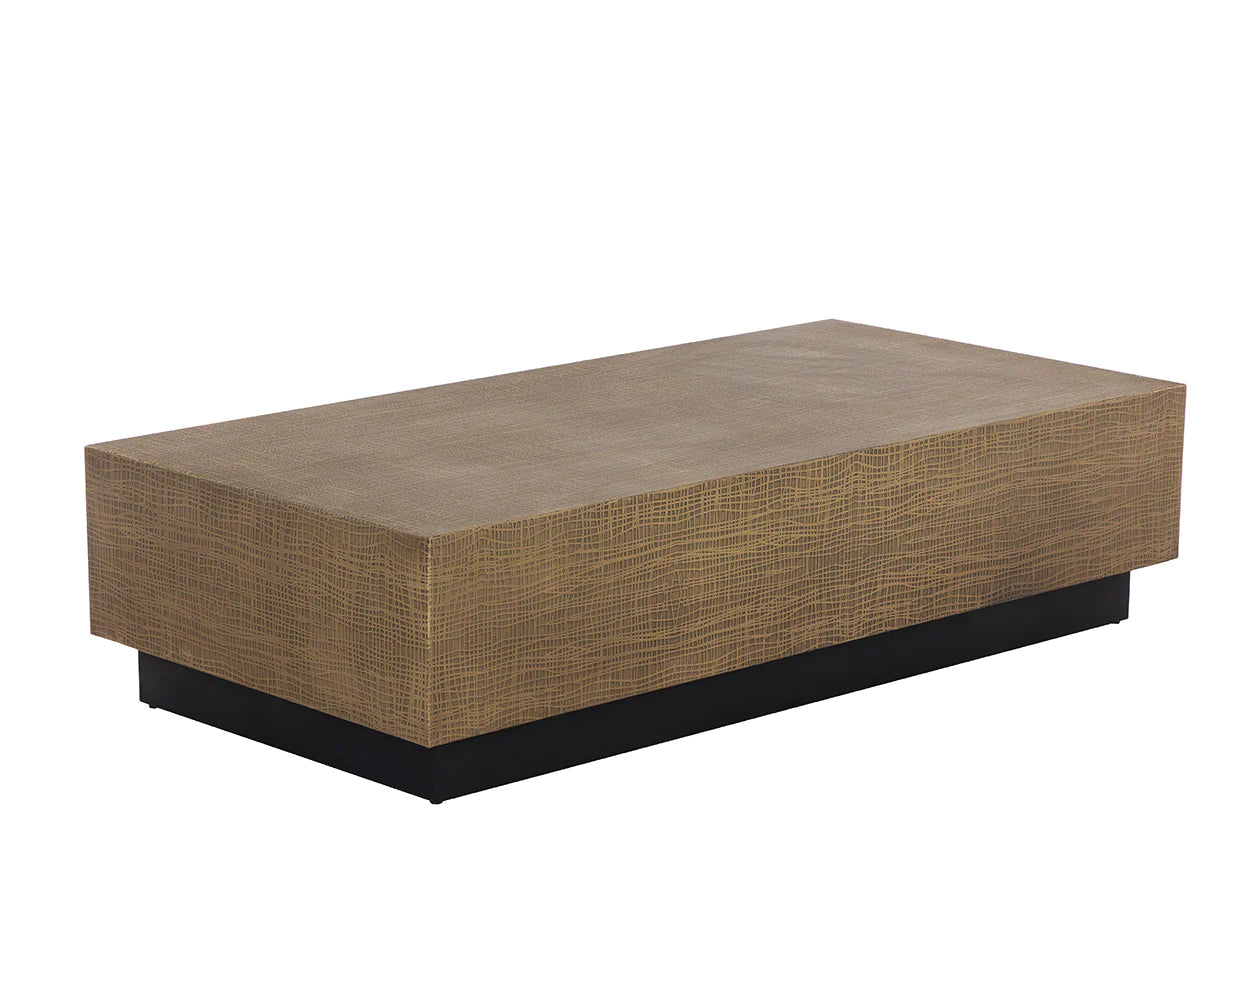 ALBANS COFFEE TABLE